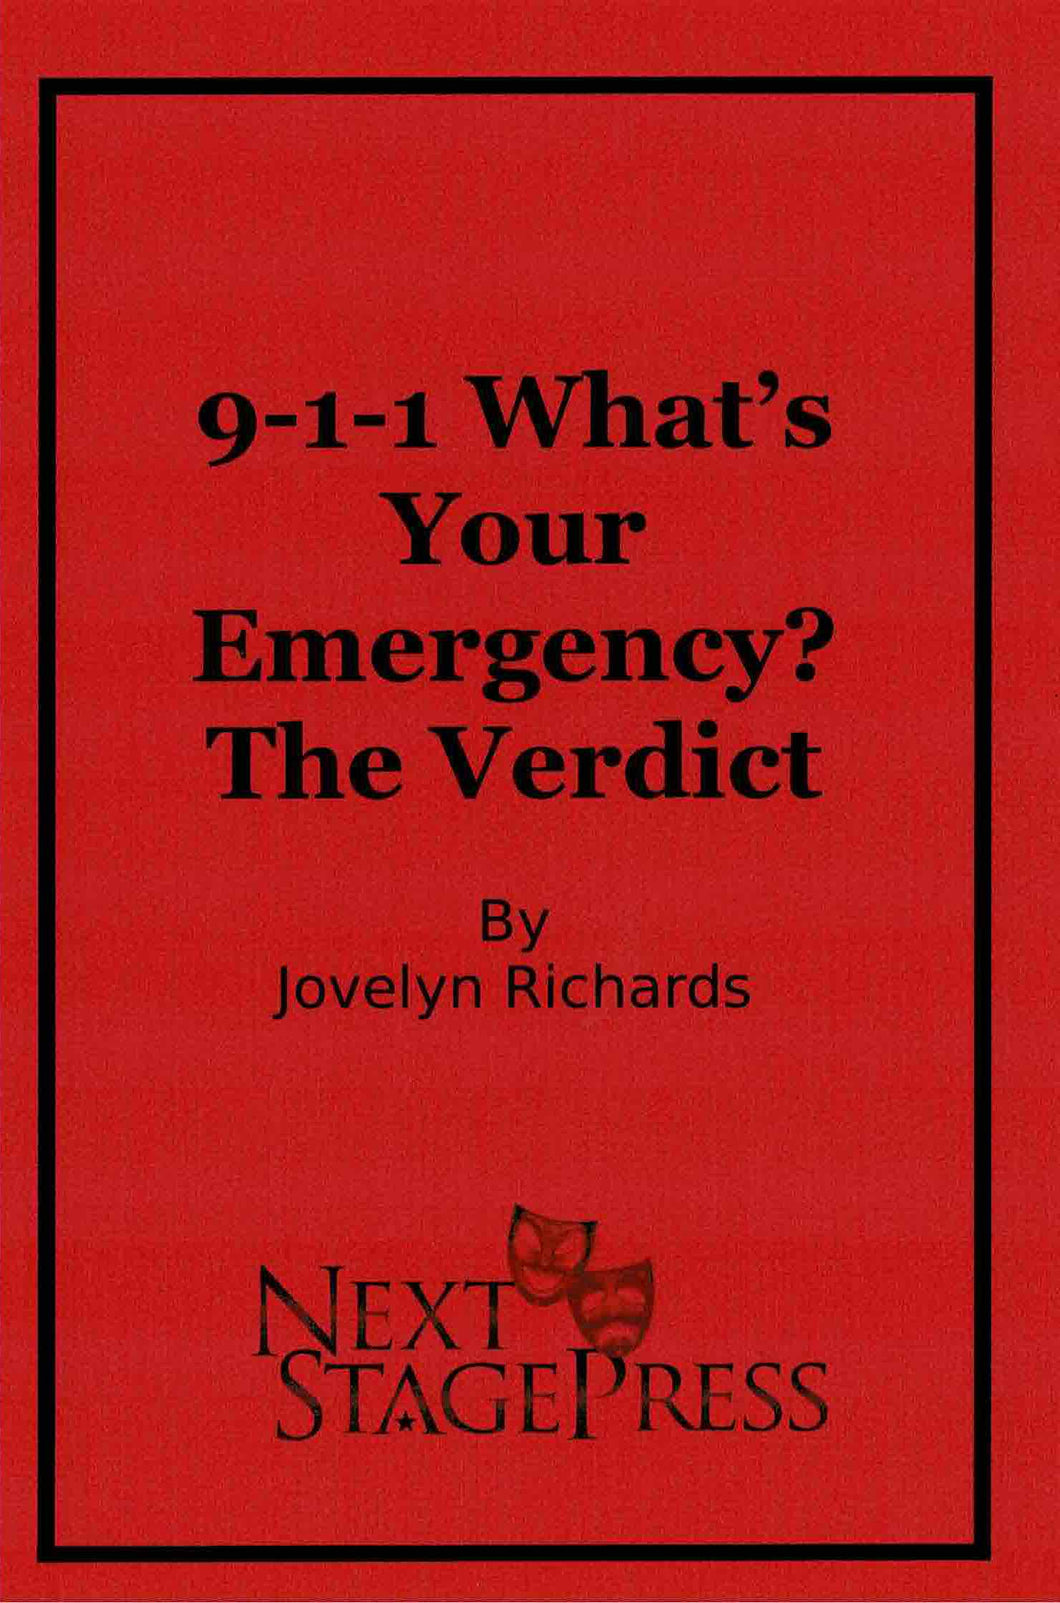 9-1-1 What's Your Emergency? The Verdict - Digital Version